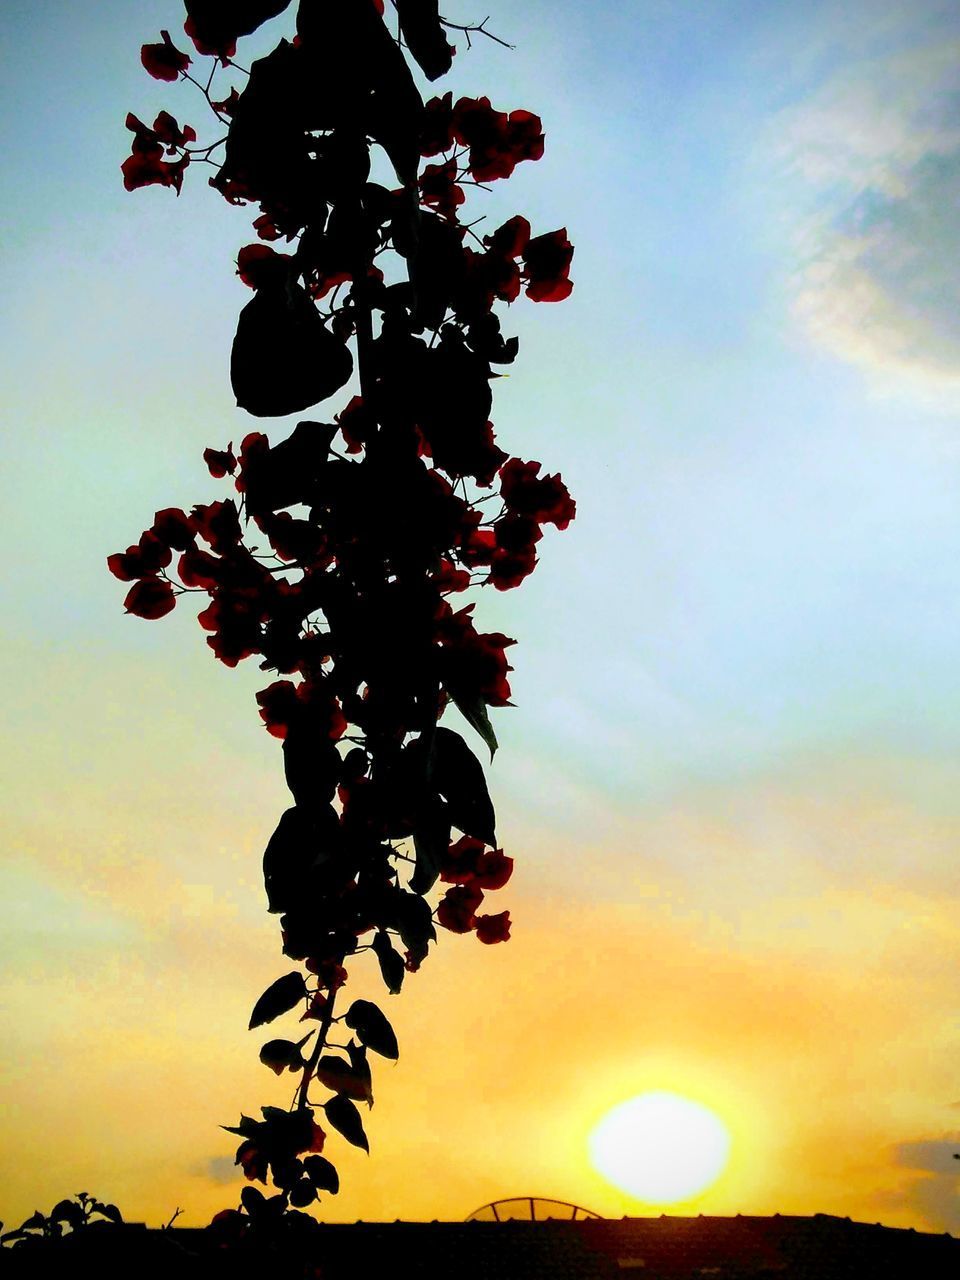 LOW ANGLE VIEW OF SILHOUETTE TREE AGAINST SKY AT SUNSET